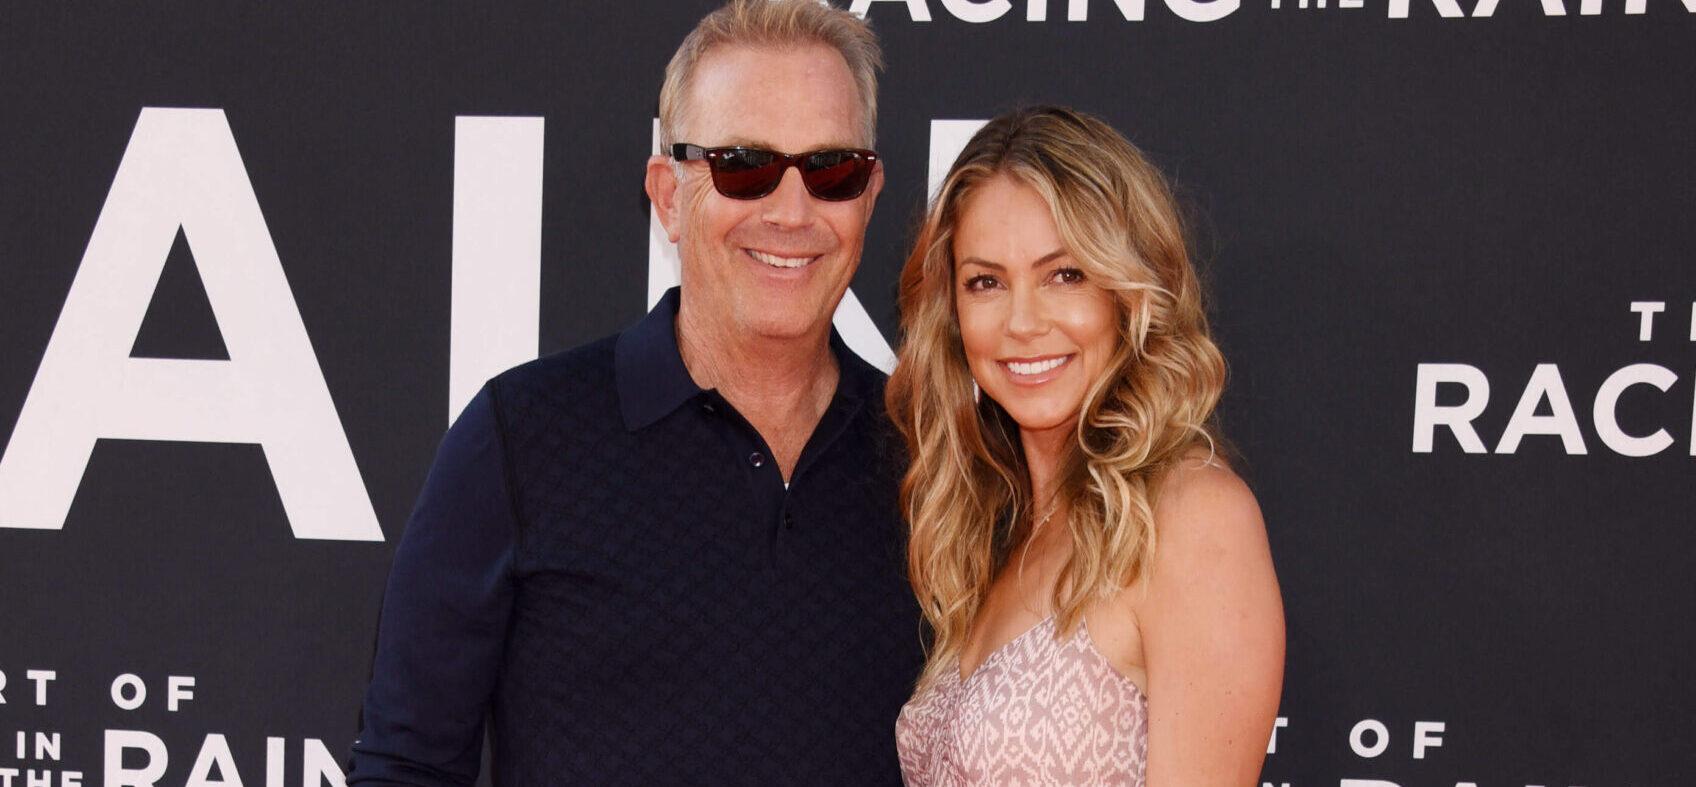 Kevin Costner's Ex-Wife Is Asking For $2 Million A Year In Child Support